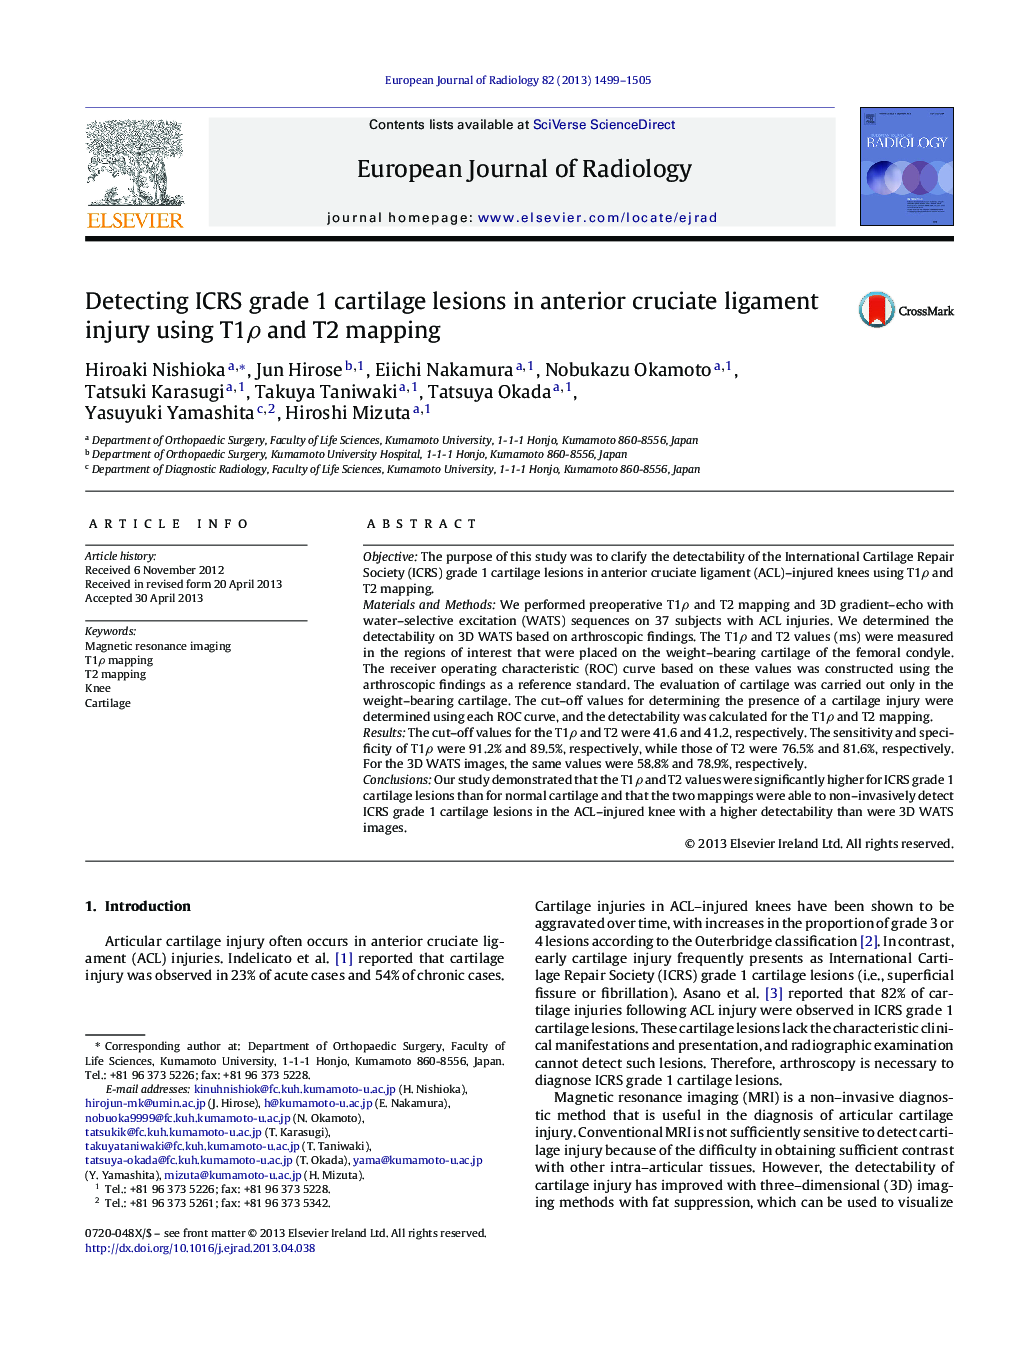 Detecting ICRS grade 1 cartilage lesions in anterior cruciate ligament injury using T1ρ and T2 mapping